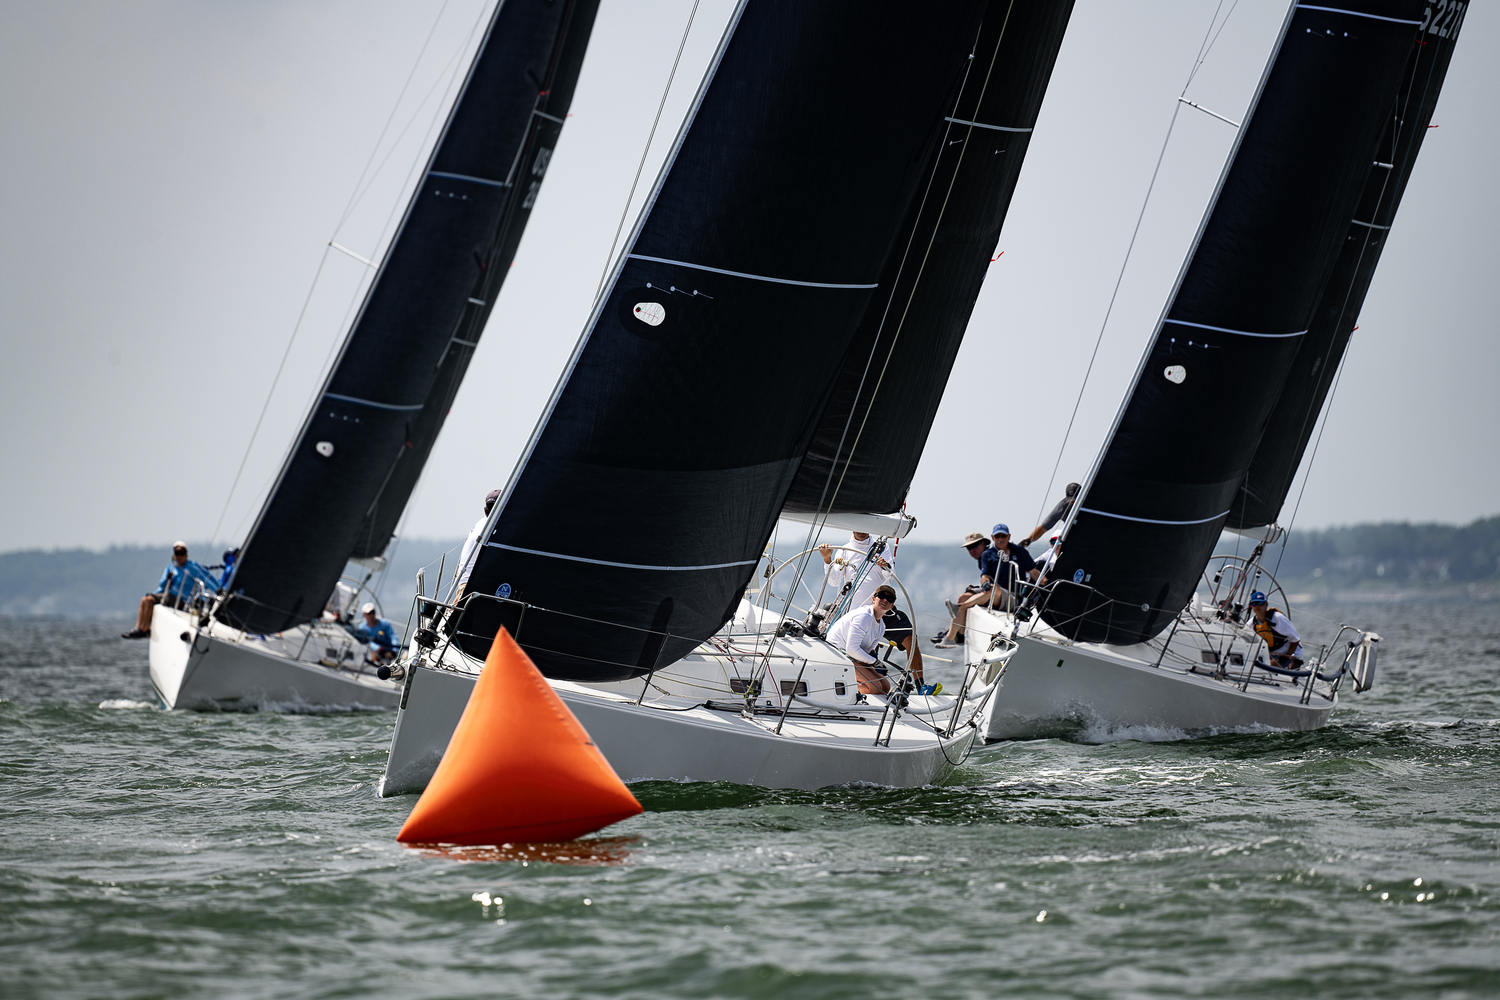 Breakwater Yacht Club hosted the 41st annual Sag Harbor Cup this past weekend.  GARY SENFT/EASTENDMARINEPHOTOGRAPHY.COM